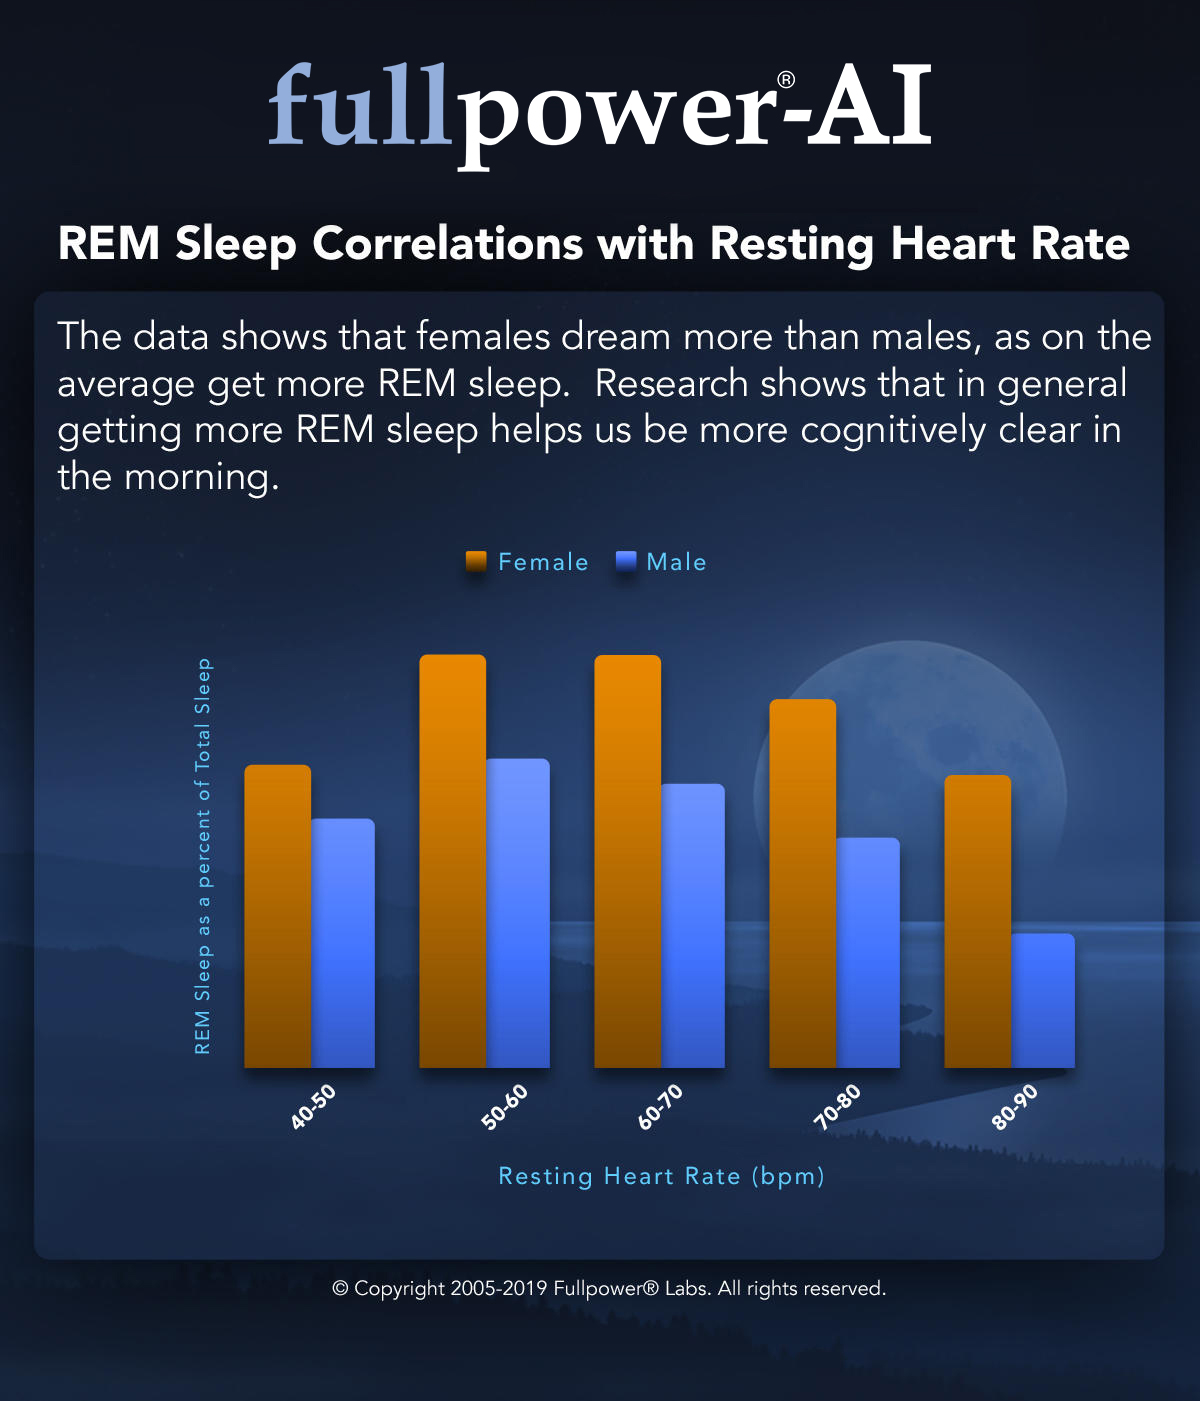 REM Sleep Correlations with Resting Heart Rate